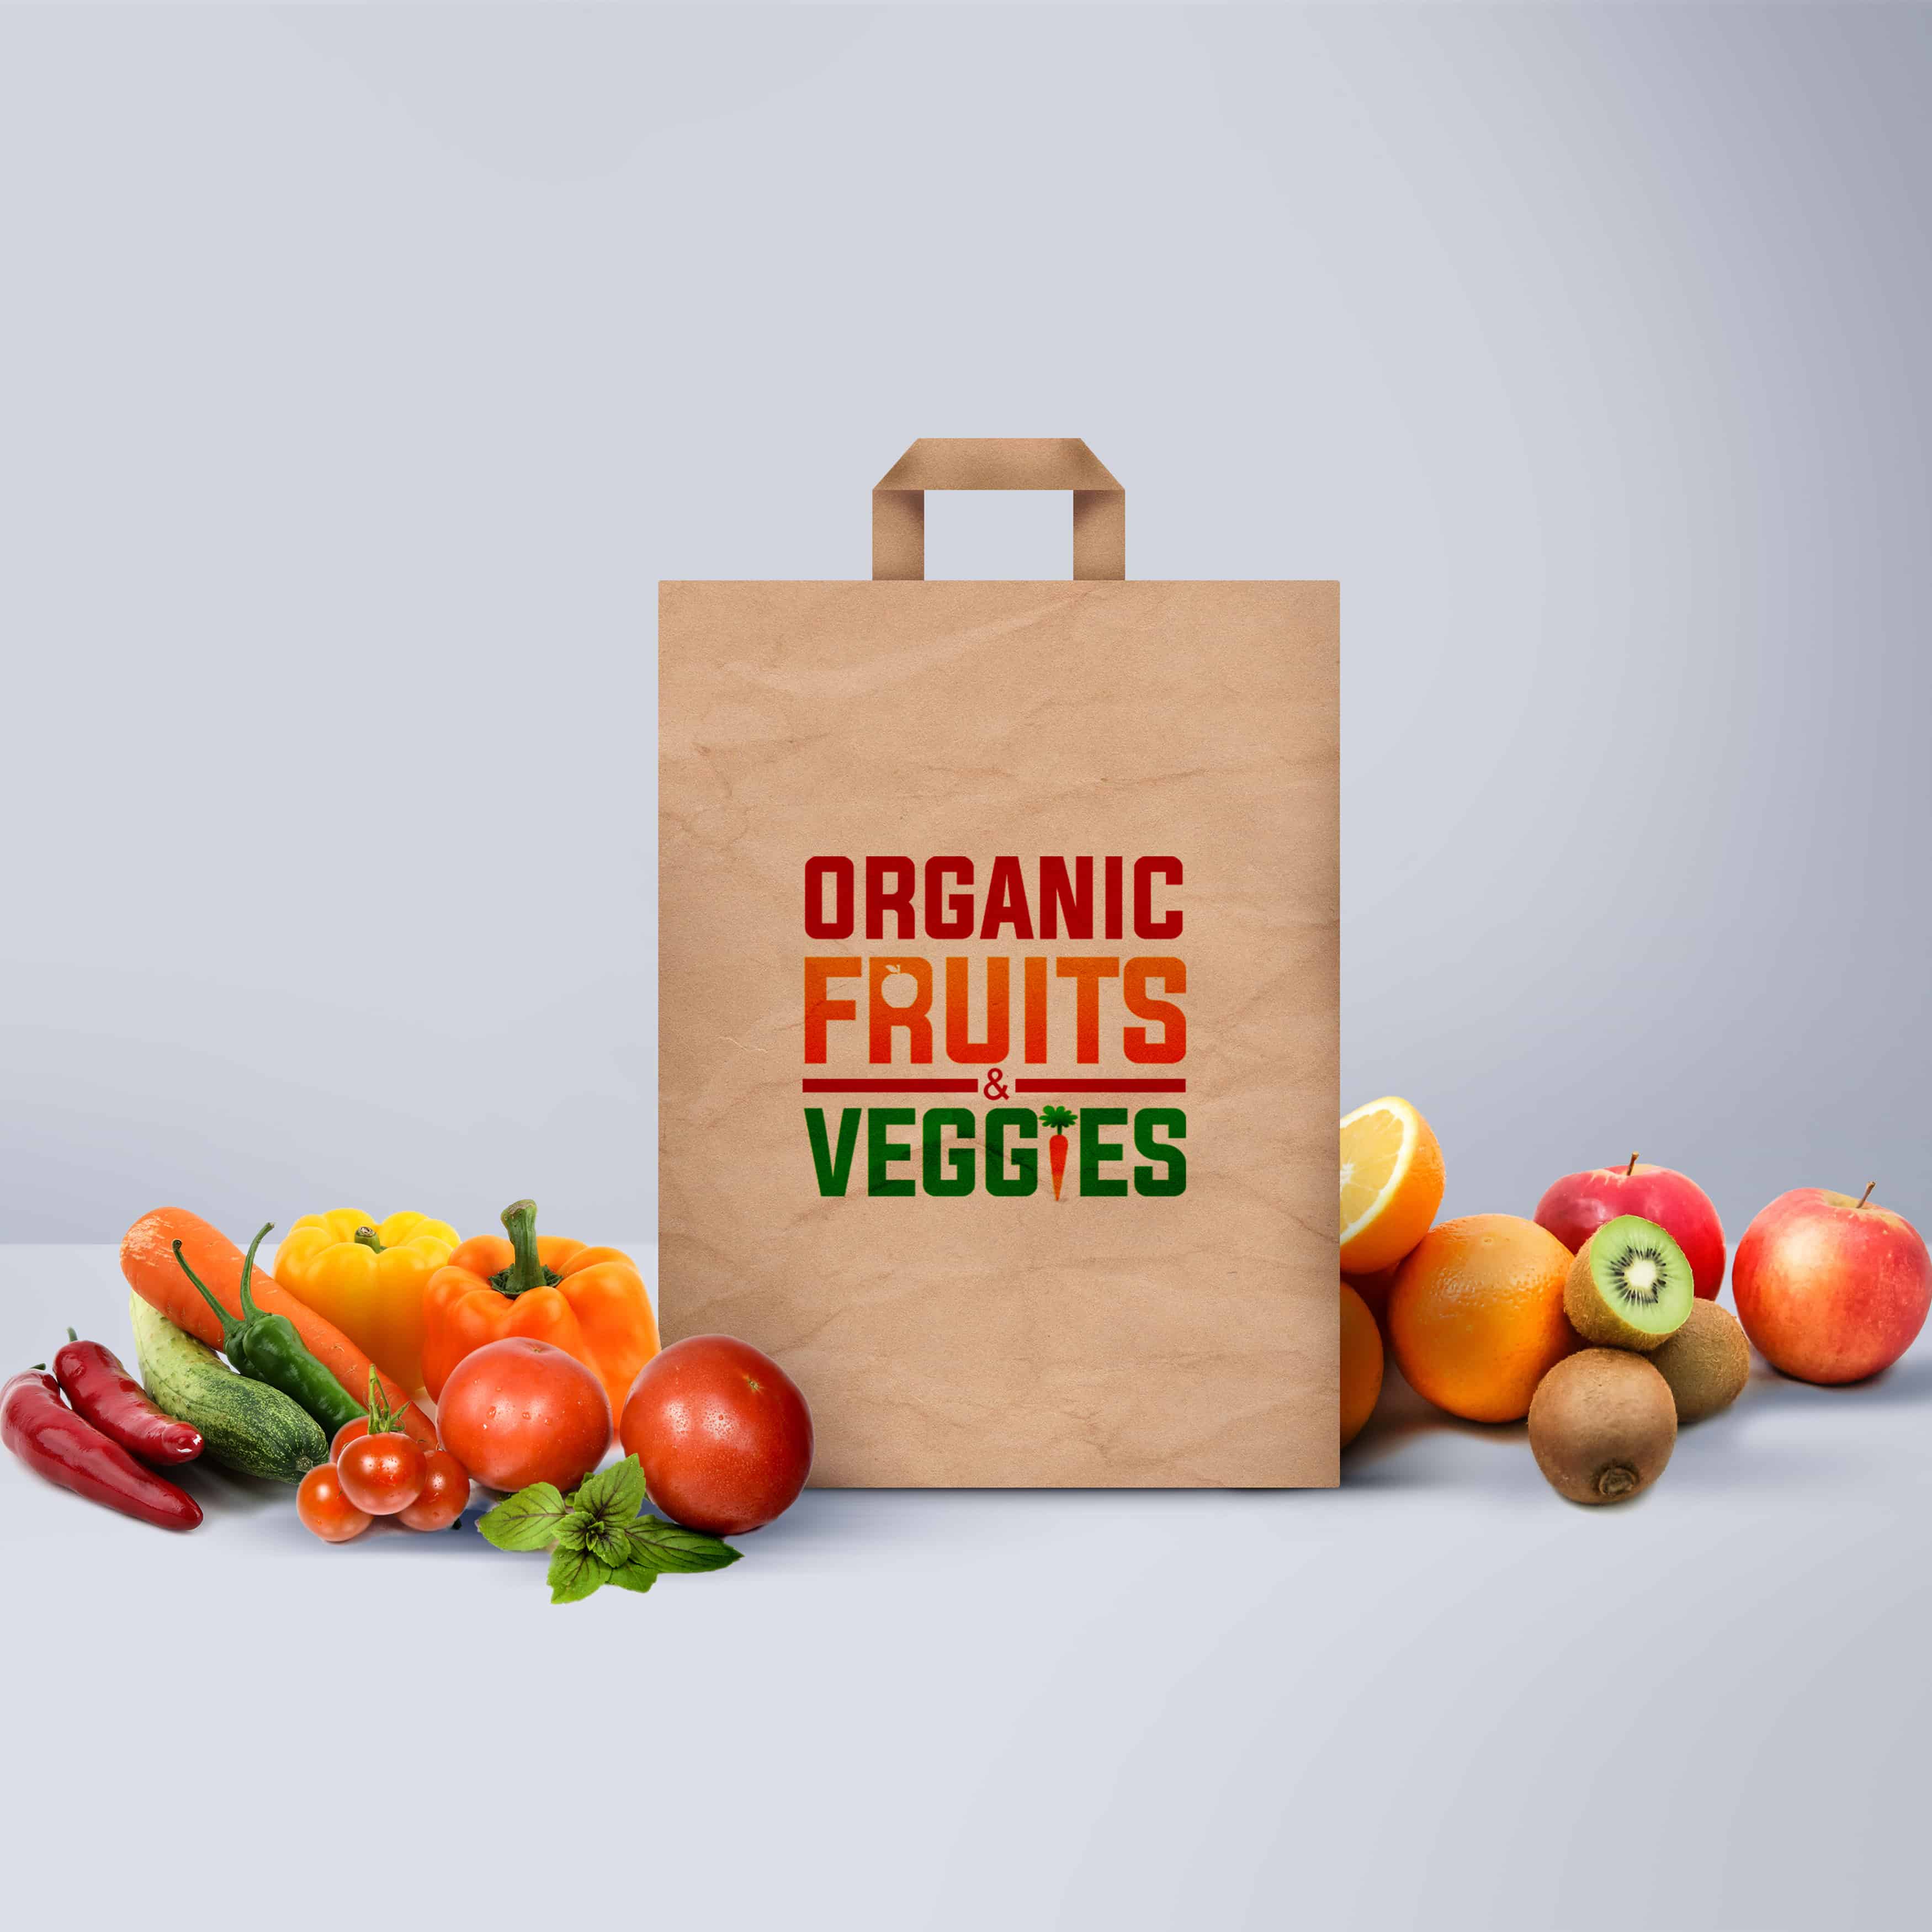 Read more about the article Organic Fruits and Veggies